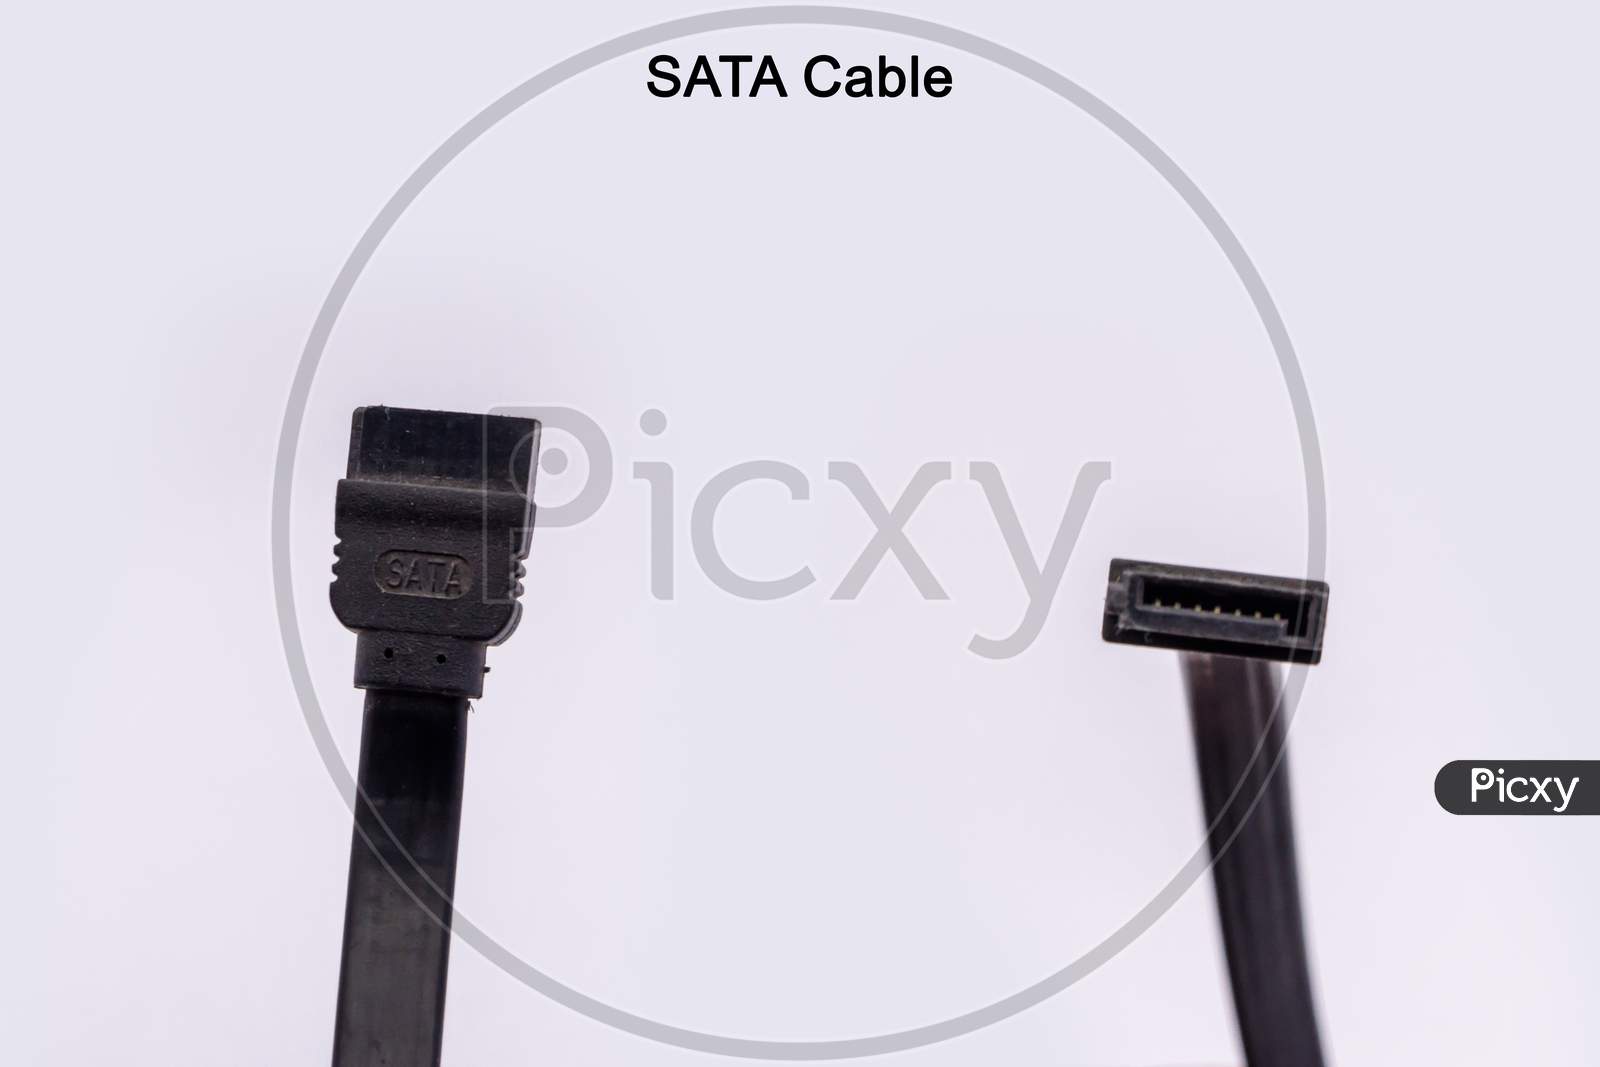 Sata Cable From Different Angles Isolated Against White Background.